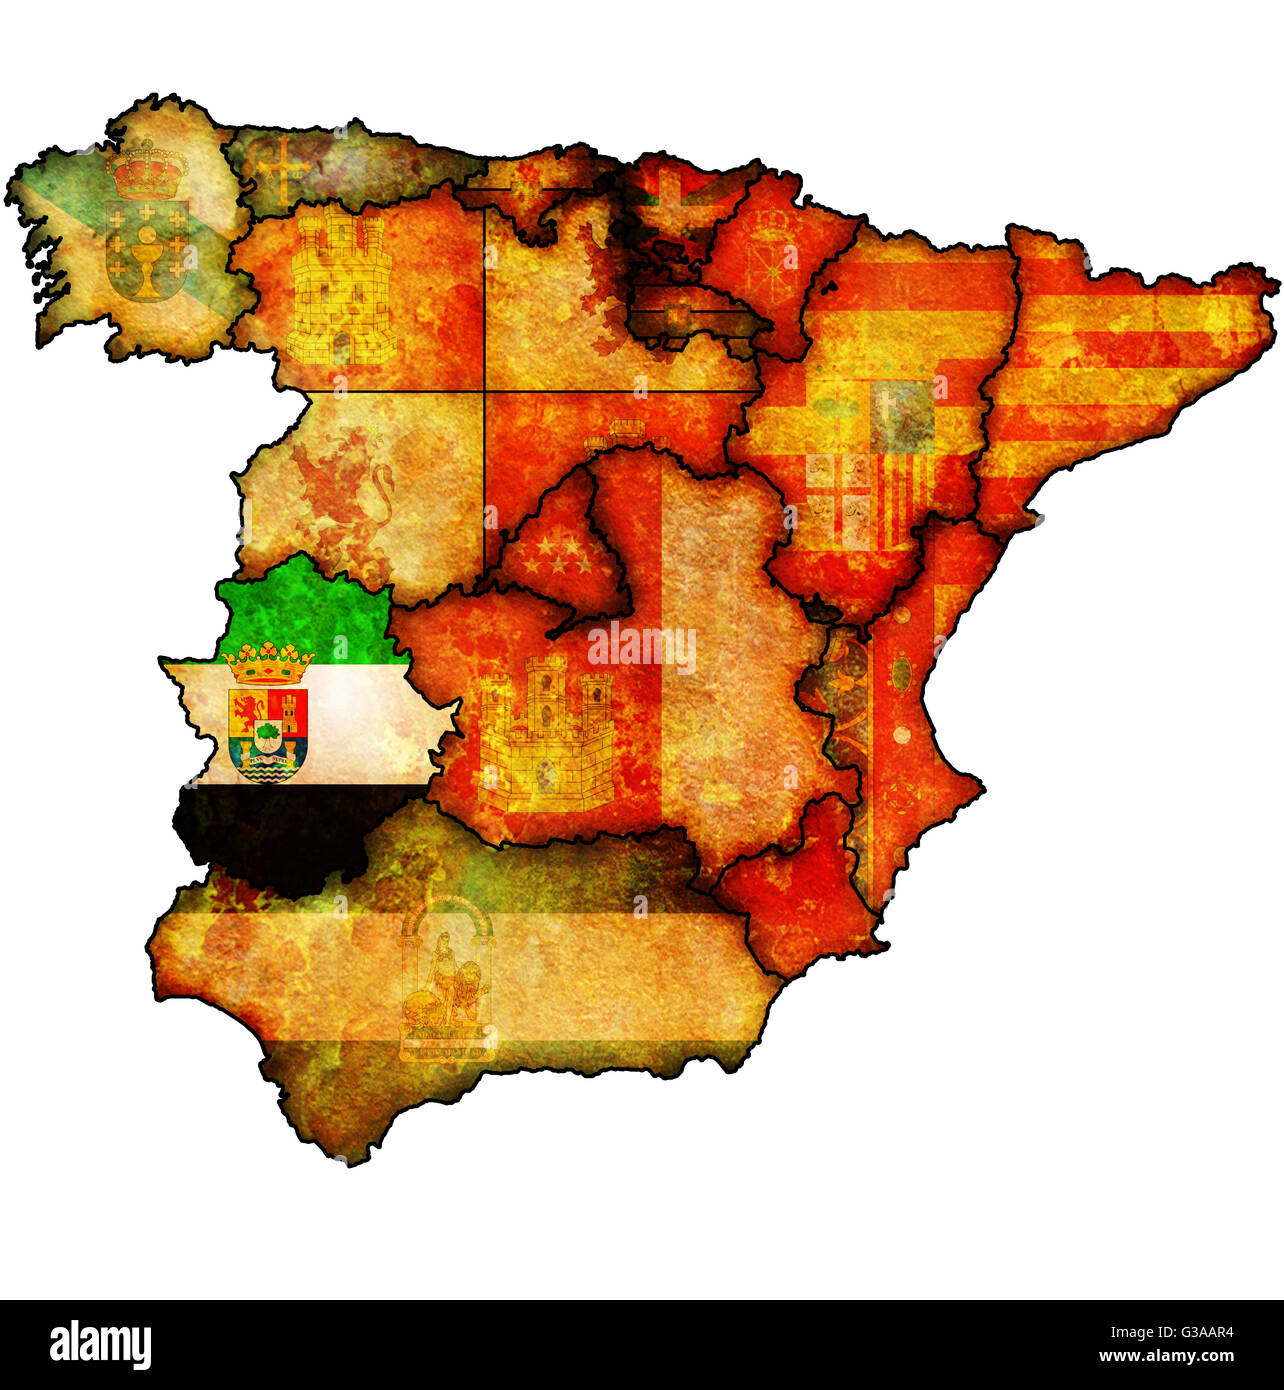 extremadura region on administration map of regions of spain with flags and emblems Stock Photo